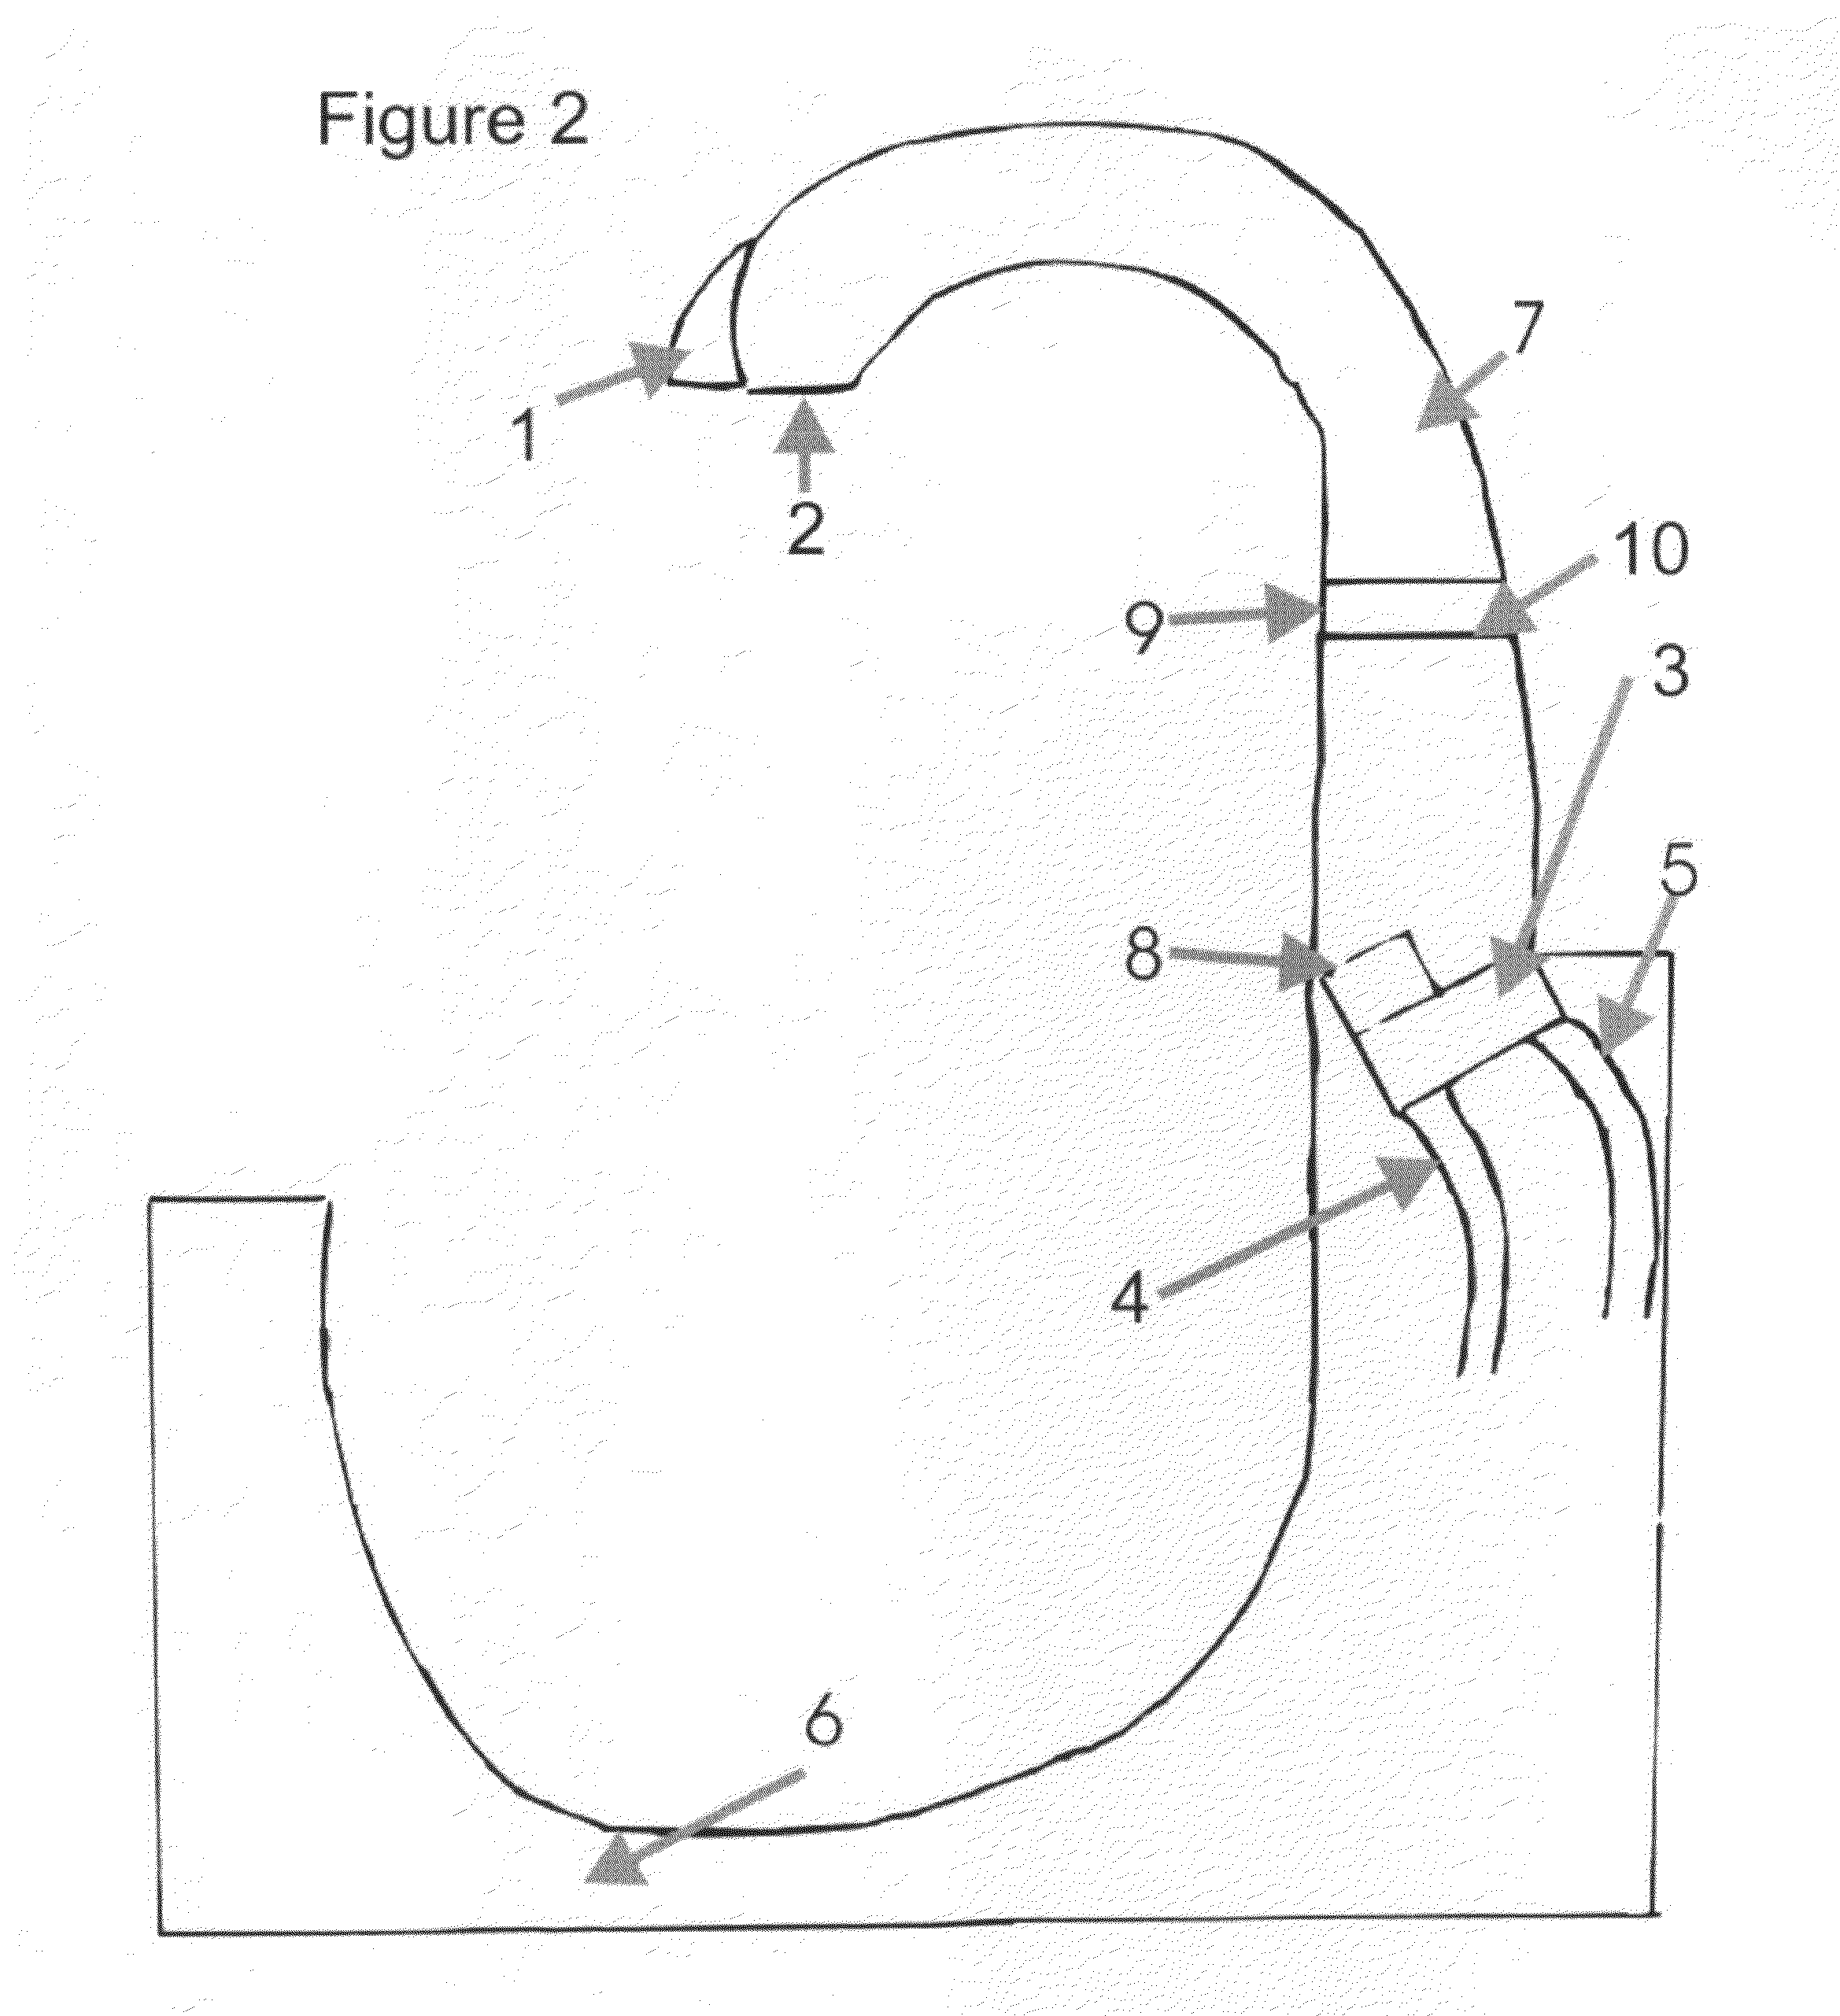 Automatic faucet with control of water temperature and water flow